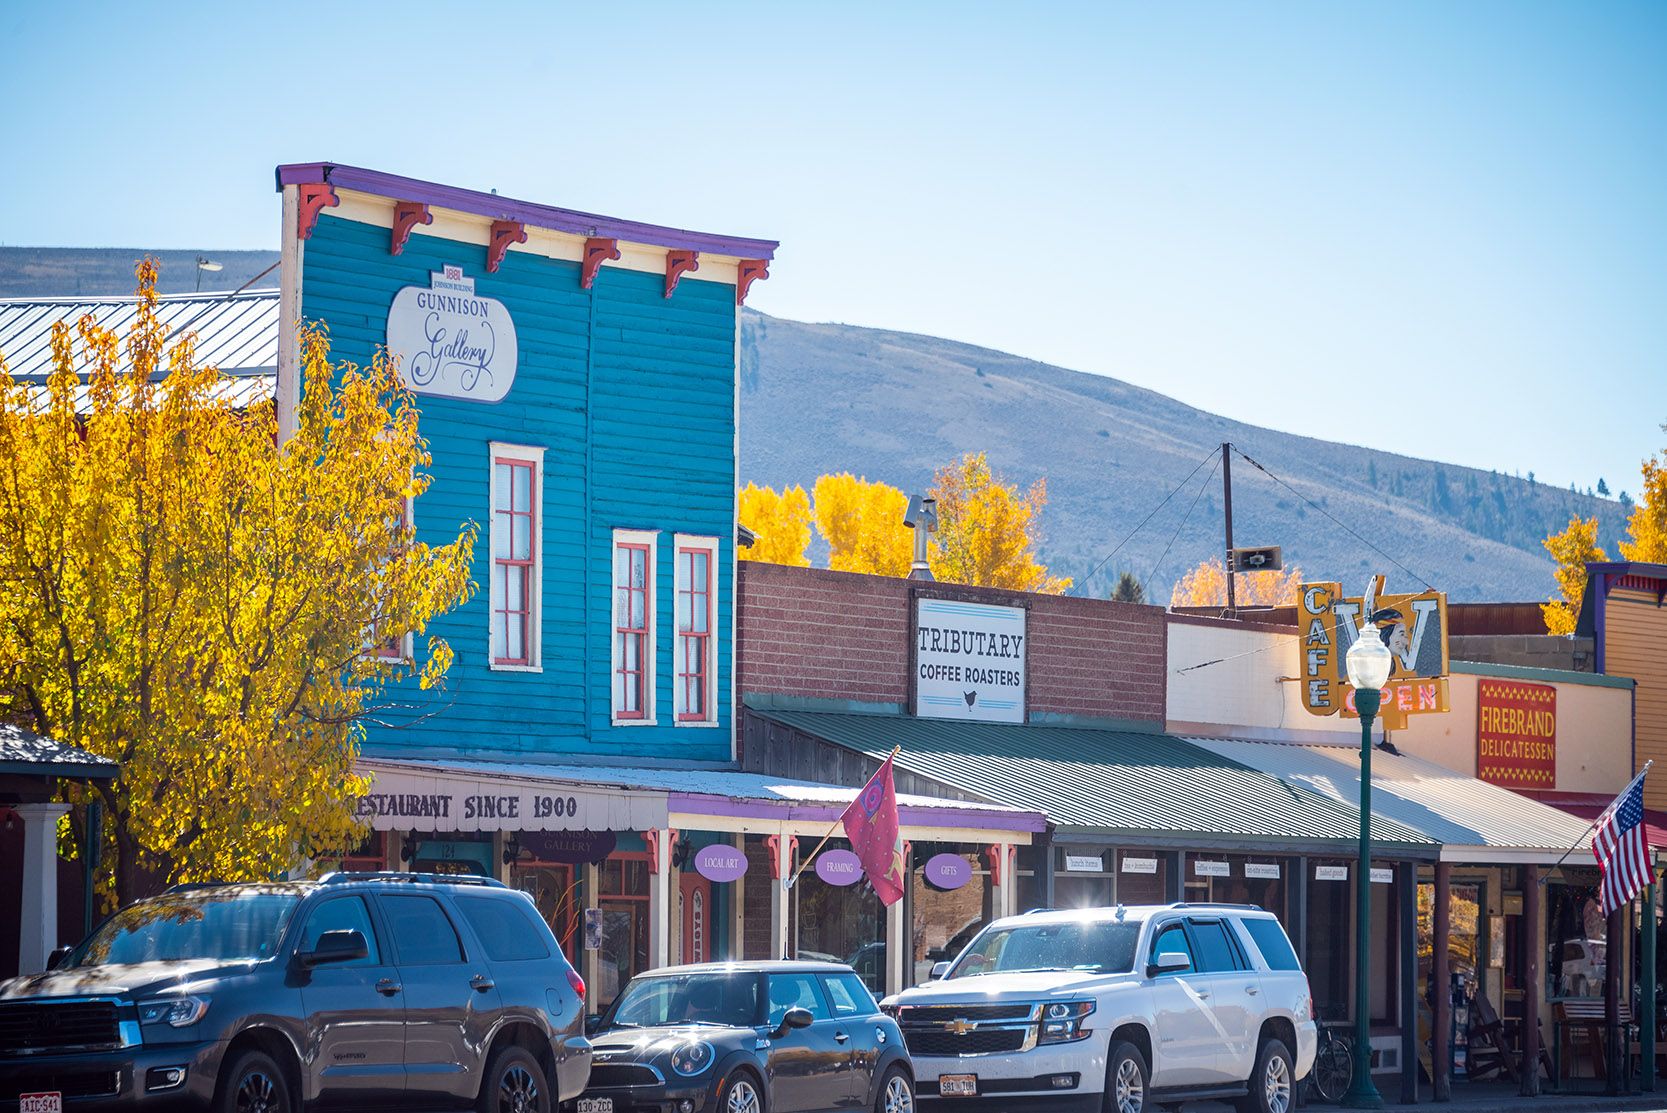 Trees with yellow leaves and bright storefronts line the street in downtown Gunnison, Colorado in fall.